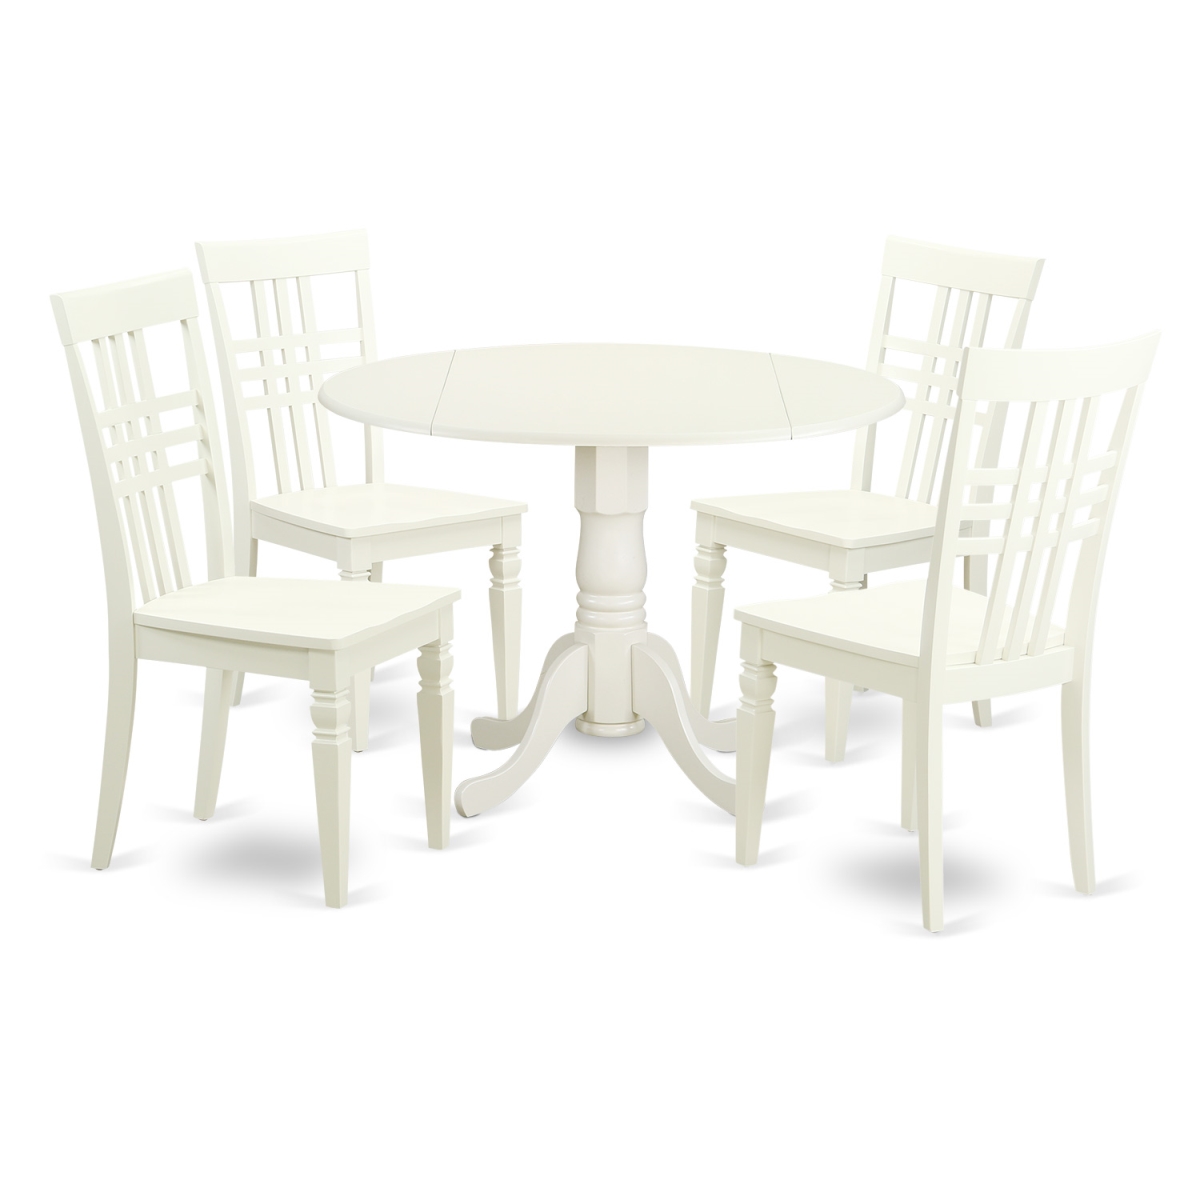 Picture of East West Furniture DLLG5-LWH-W Small Kitchen Table Set with One Dublin Table & 4 Chairs, Linen White - 5 Piece